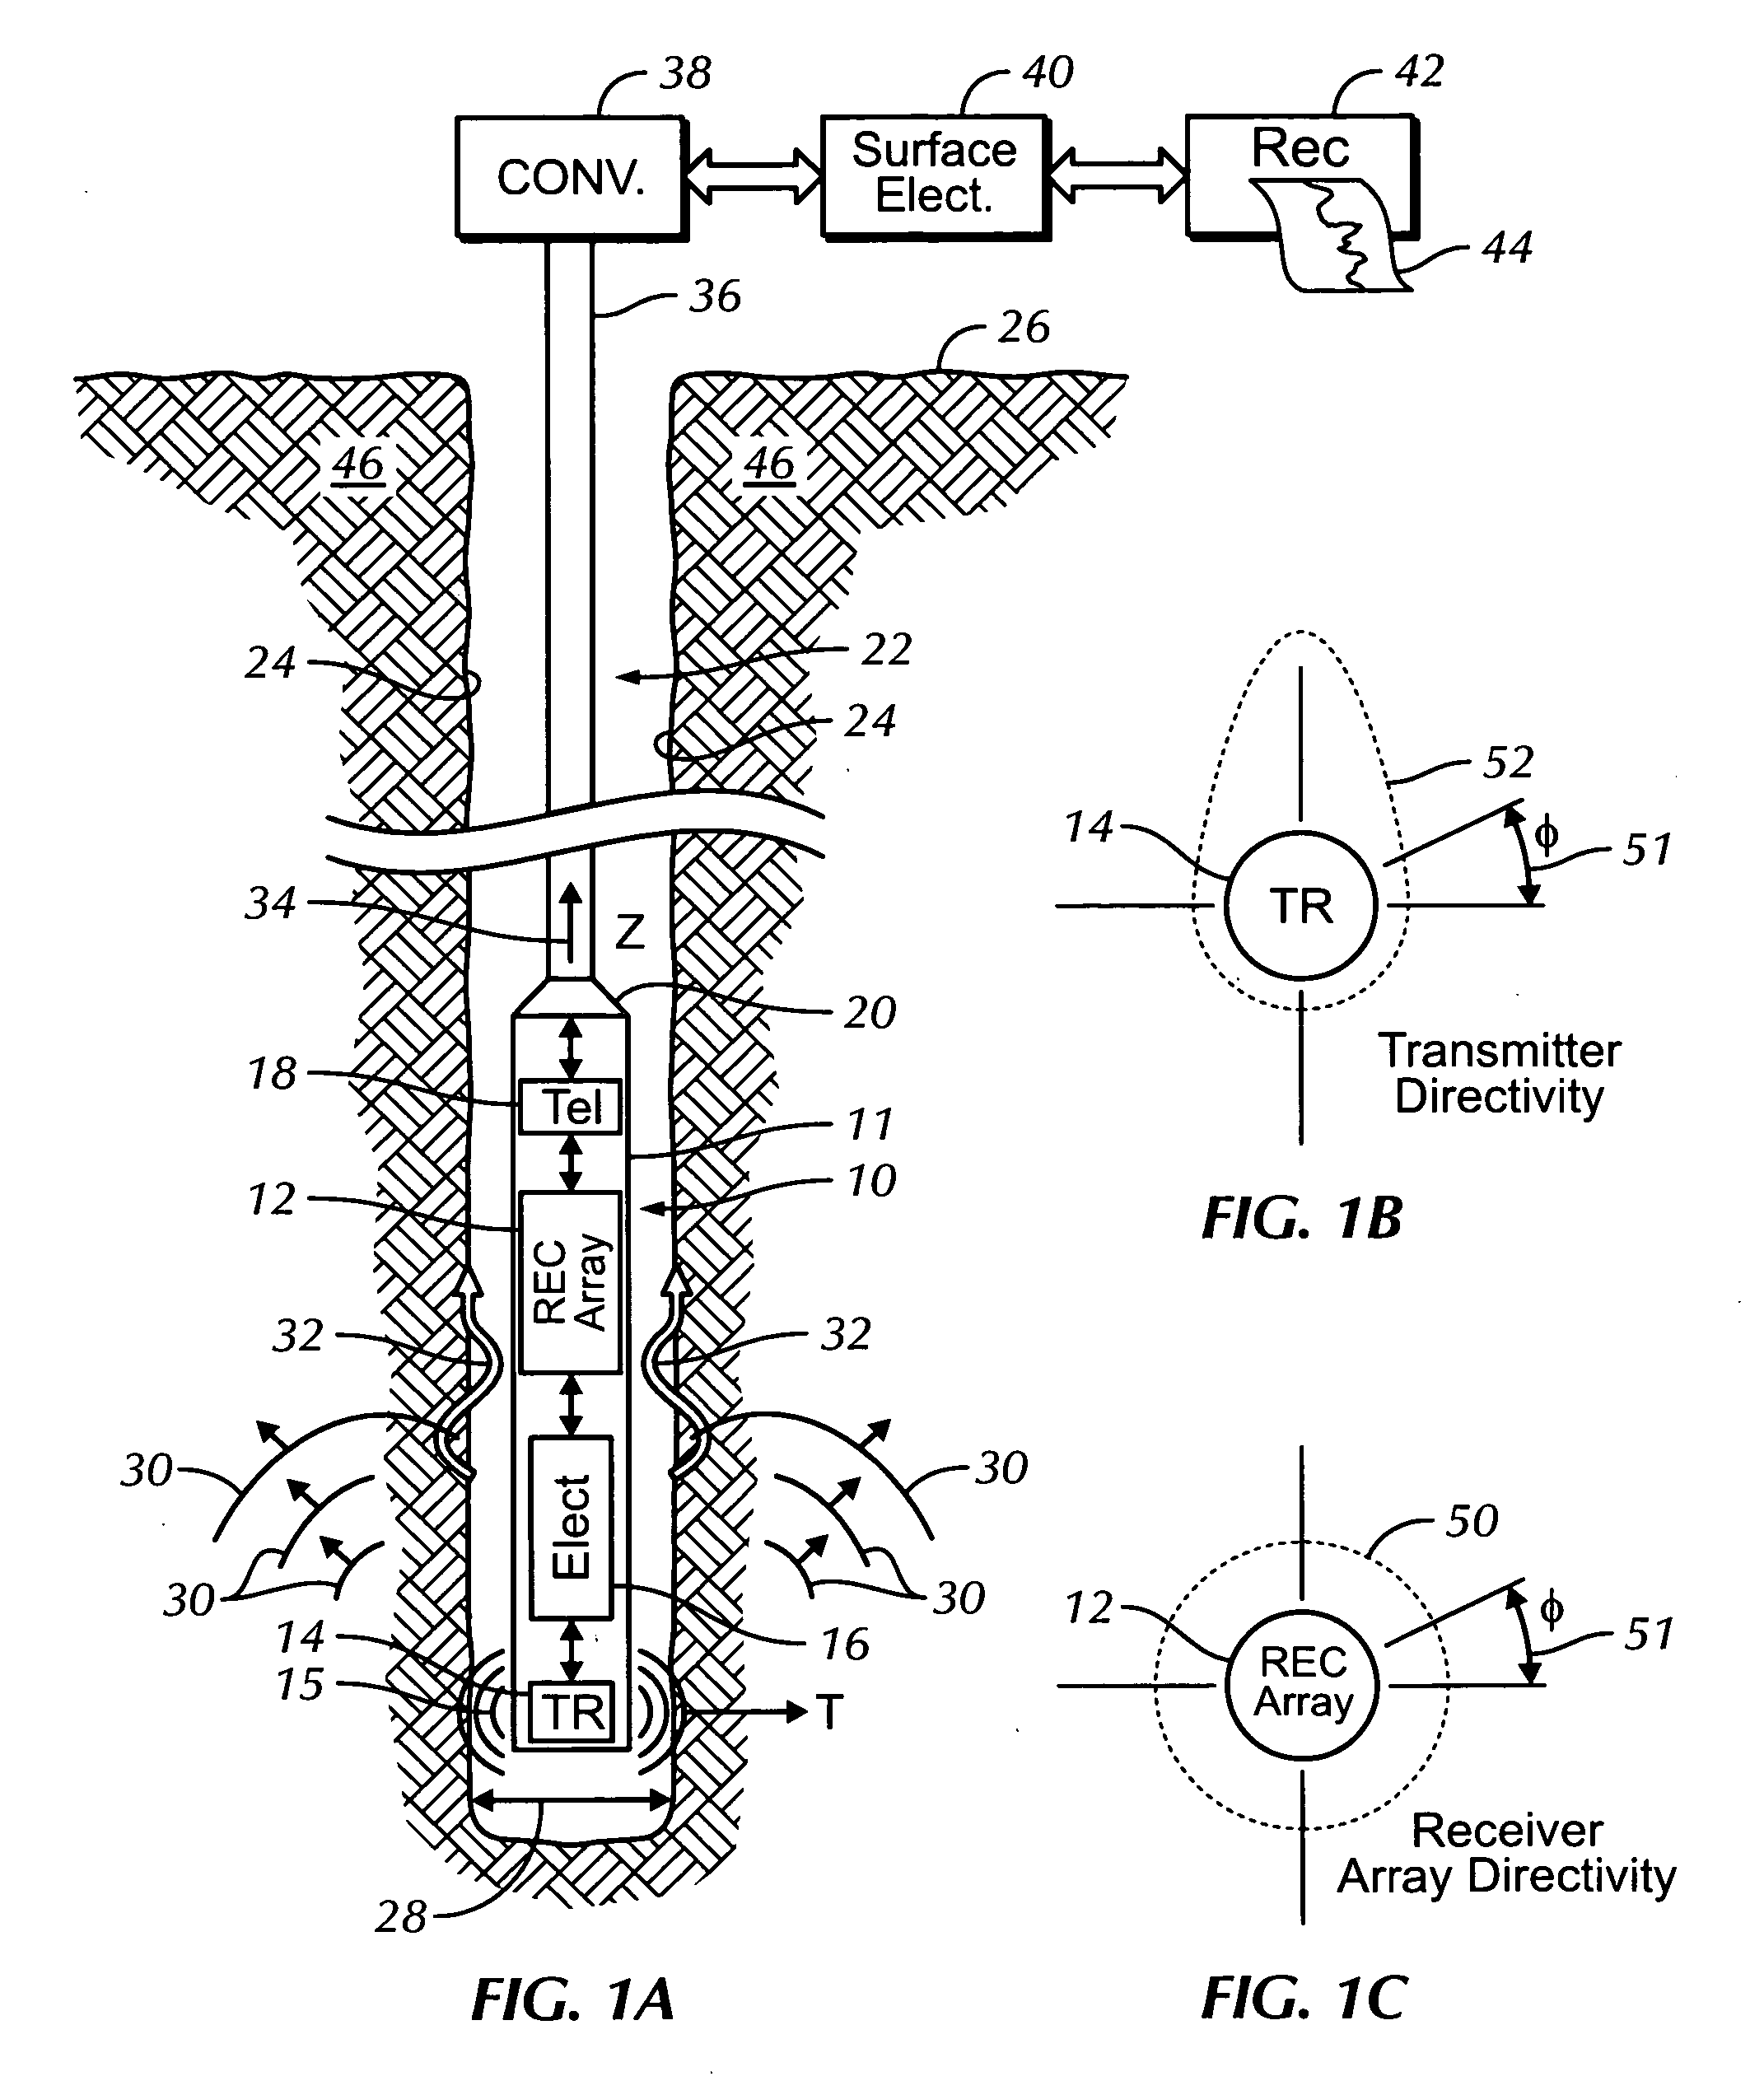 Borehole apparatus and methods for simultaneous multimode excitation and reception to determine elastic wave velocities, elastic modulii, degree of anisotropy and elastic symmetry configurations